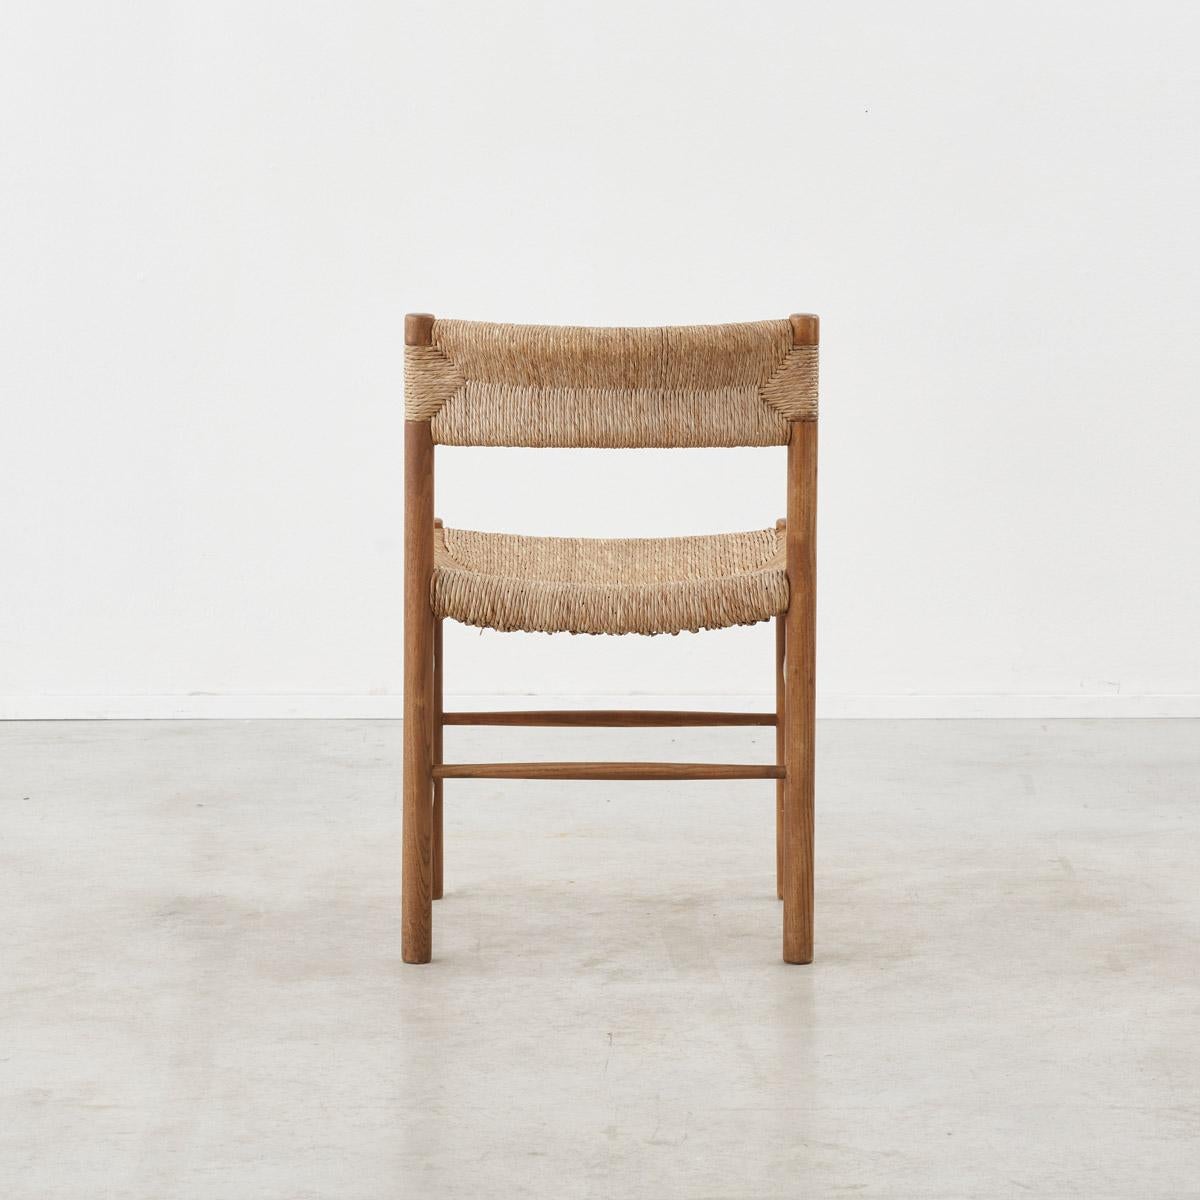 Woven Pair of Charlotte Perriand Dordogne Chairs for Robert Sentou, France c1950